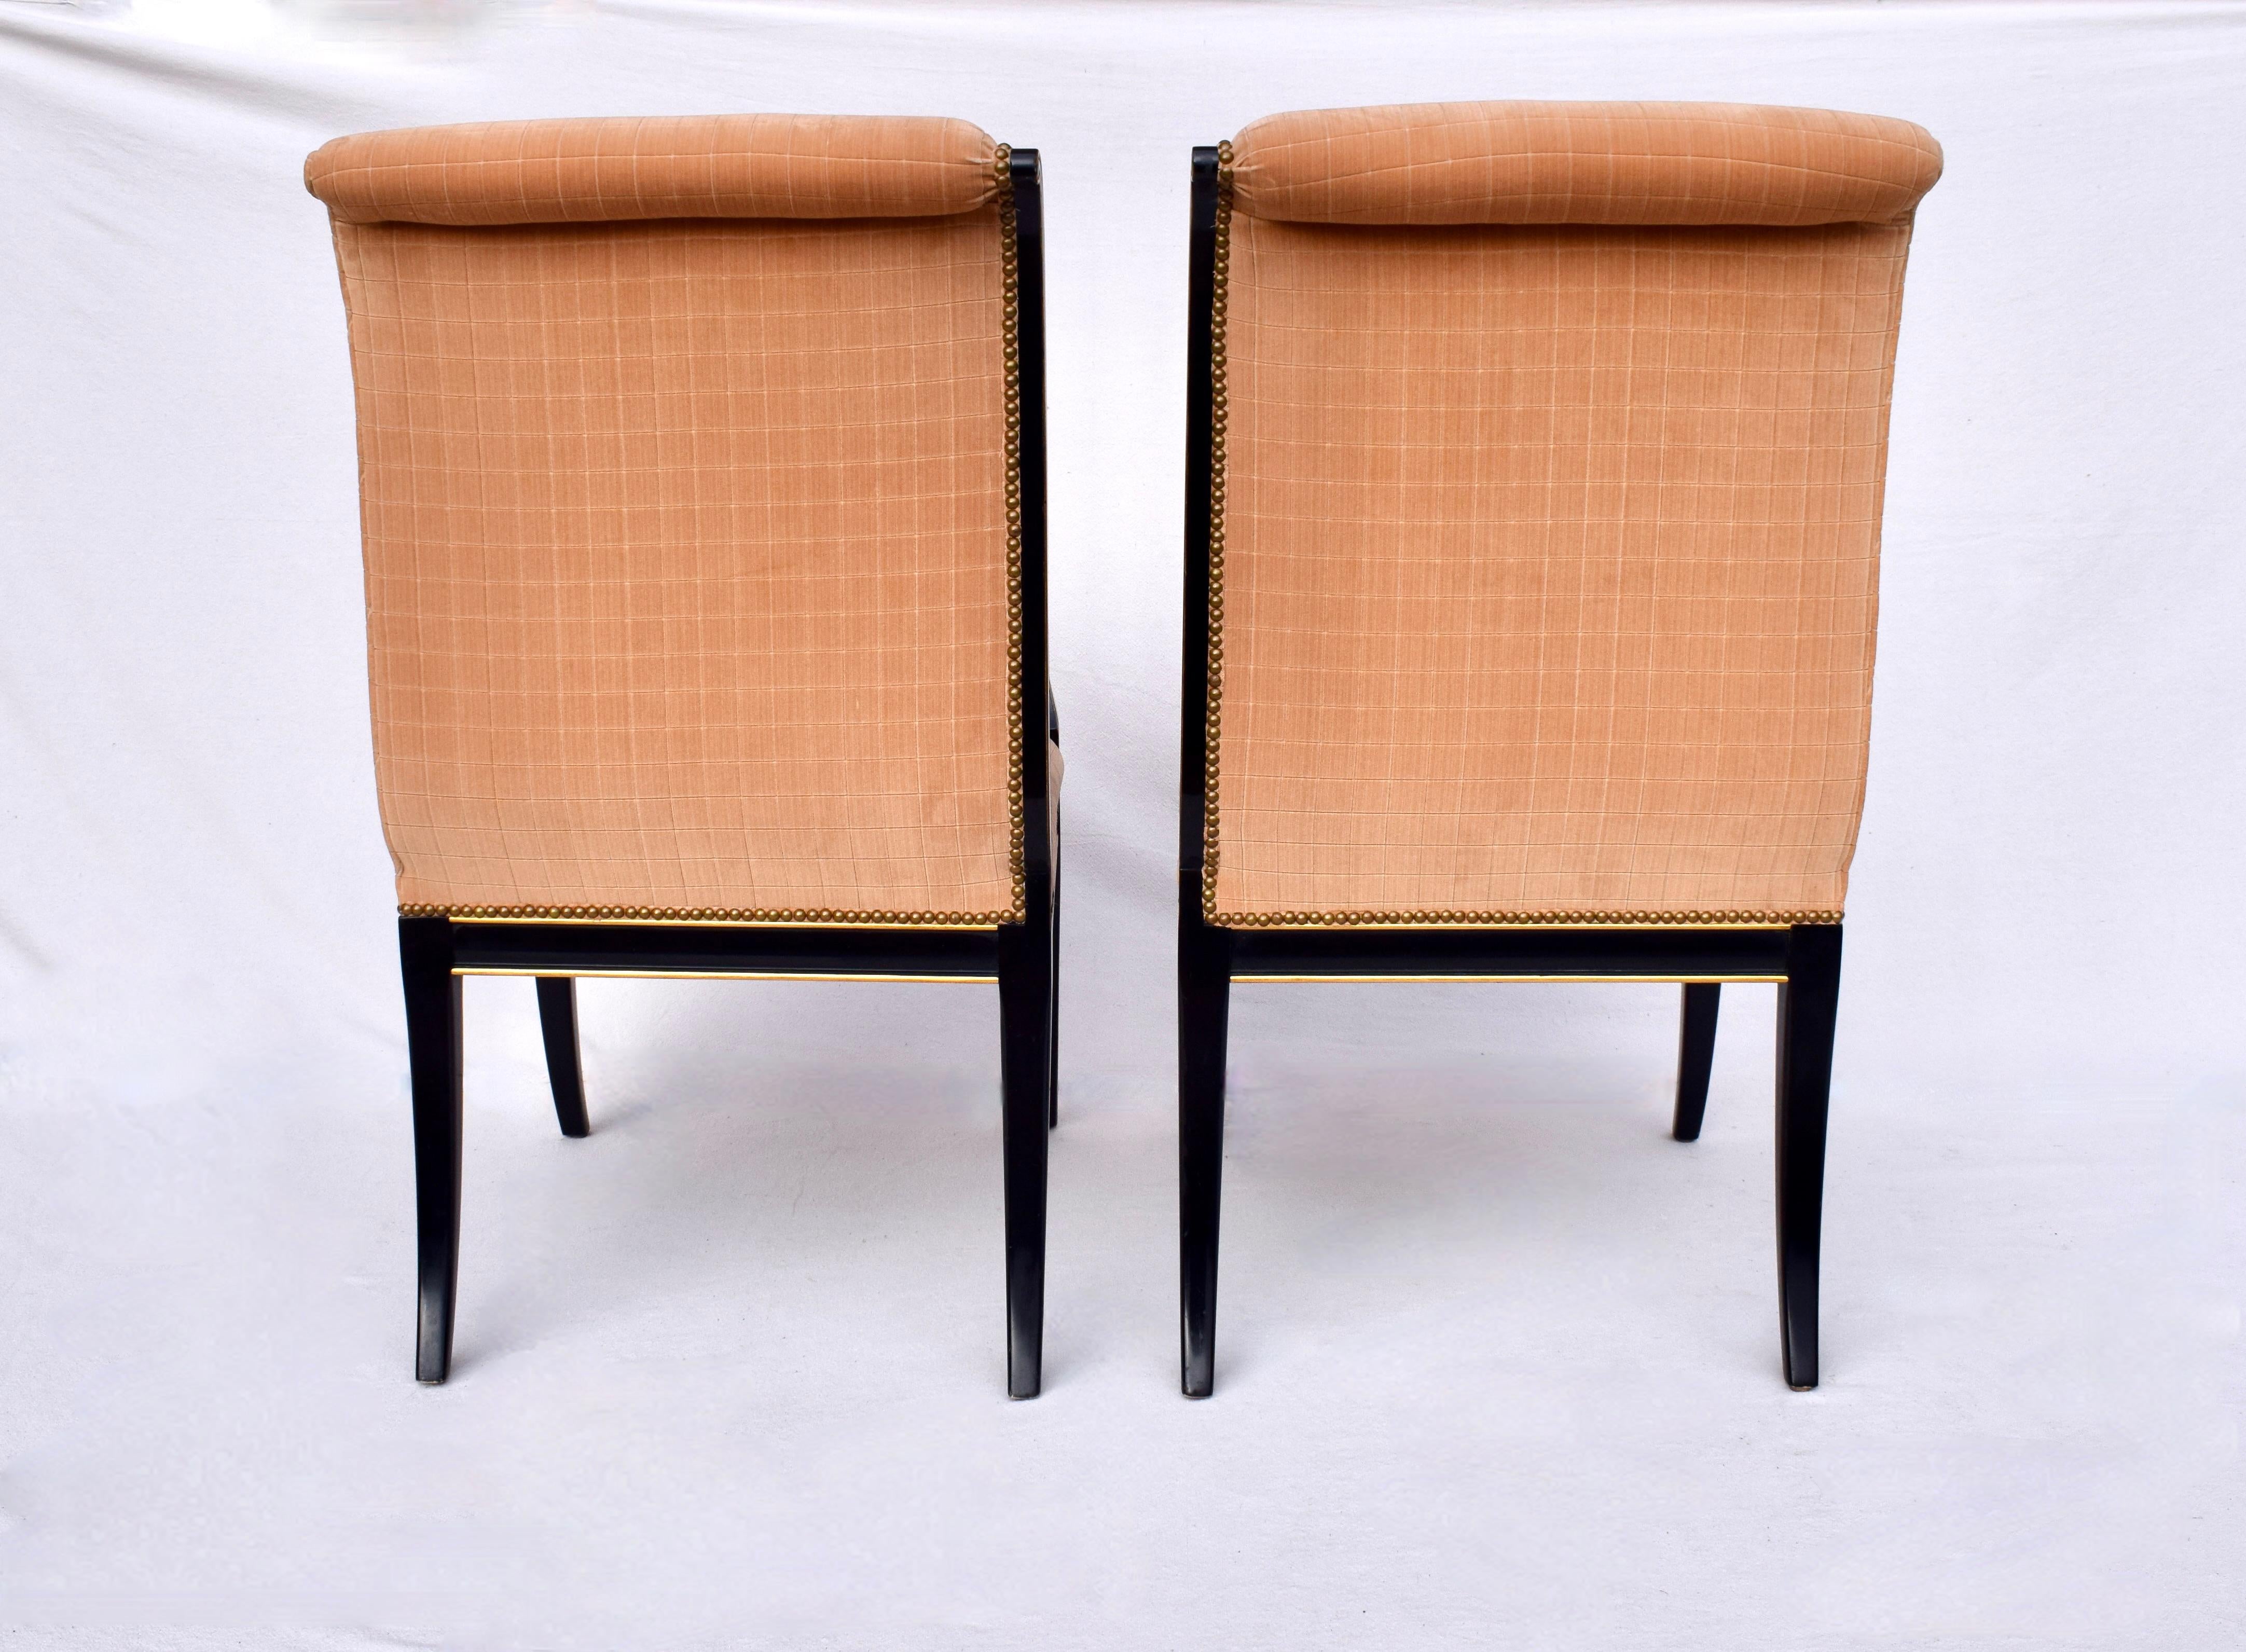 Lacquered Karges Furniture Parler Deux Right & Left Regency Chairs For Sale